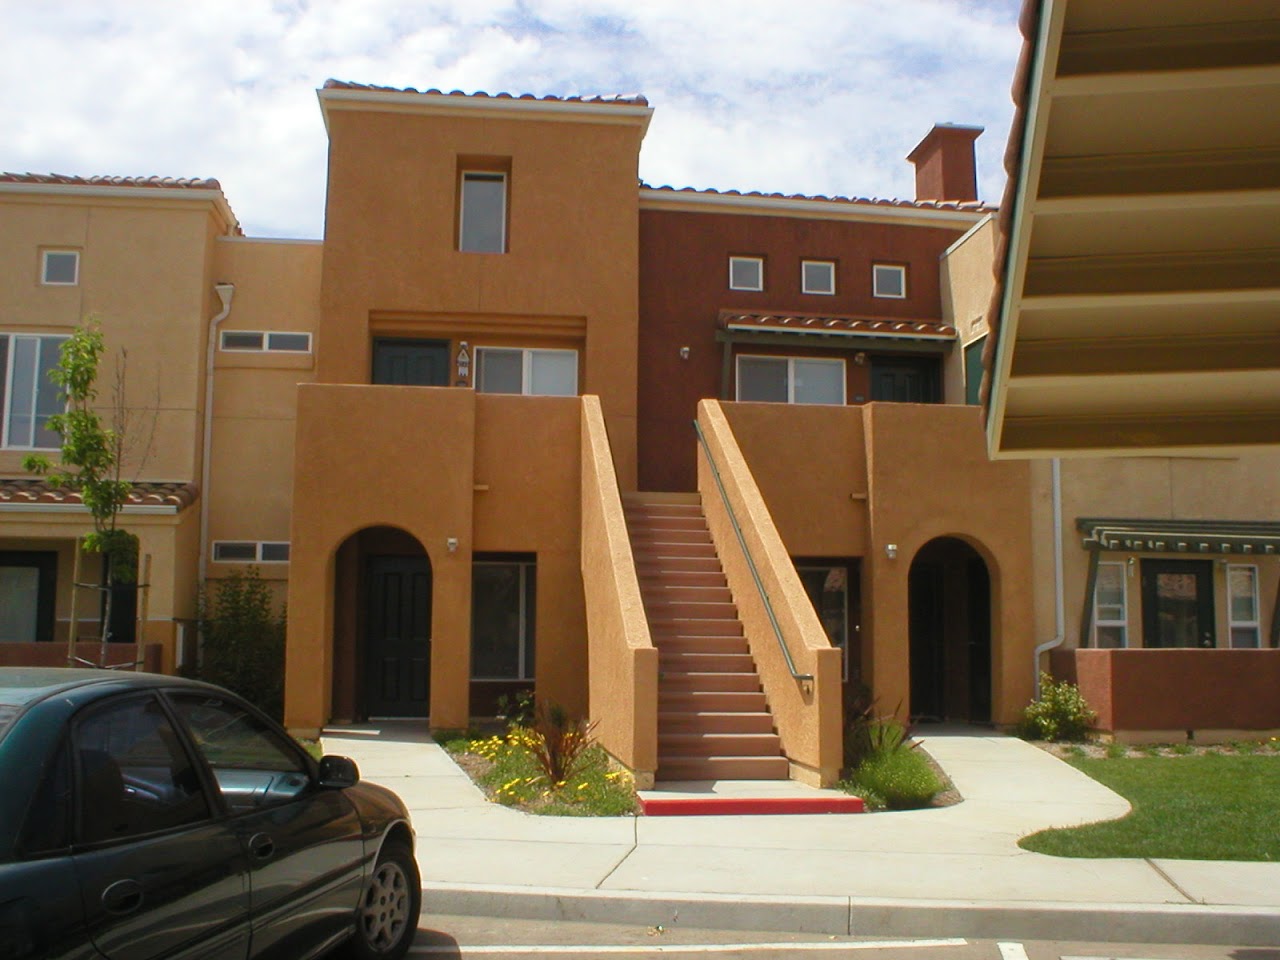 Photo of WESTGATE COURTYARDS. Affordable housing located at 1240 BETHEL LN SANTA MARIA, CA 93458